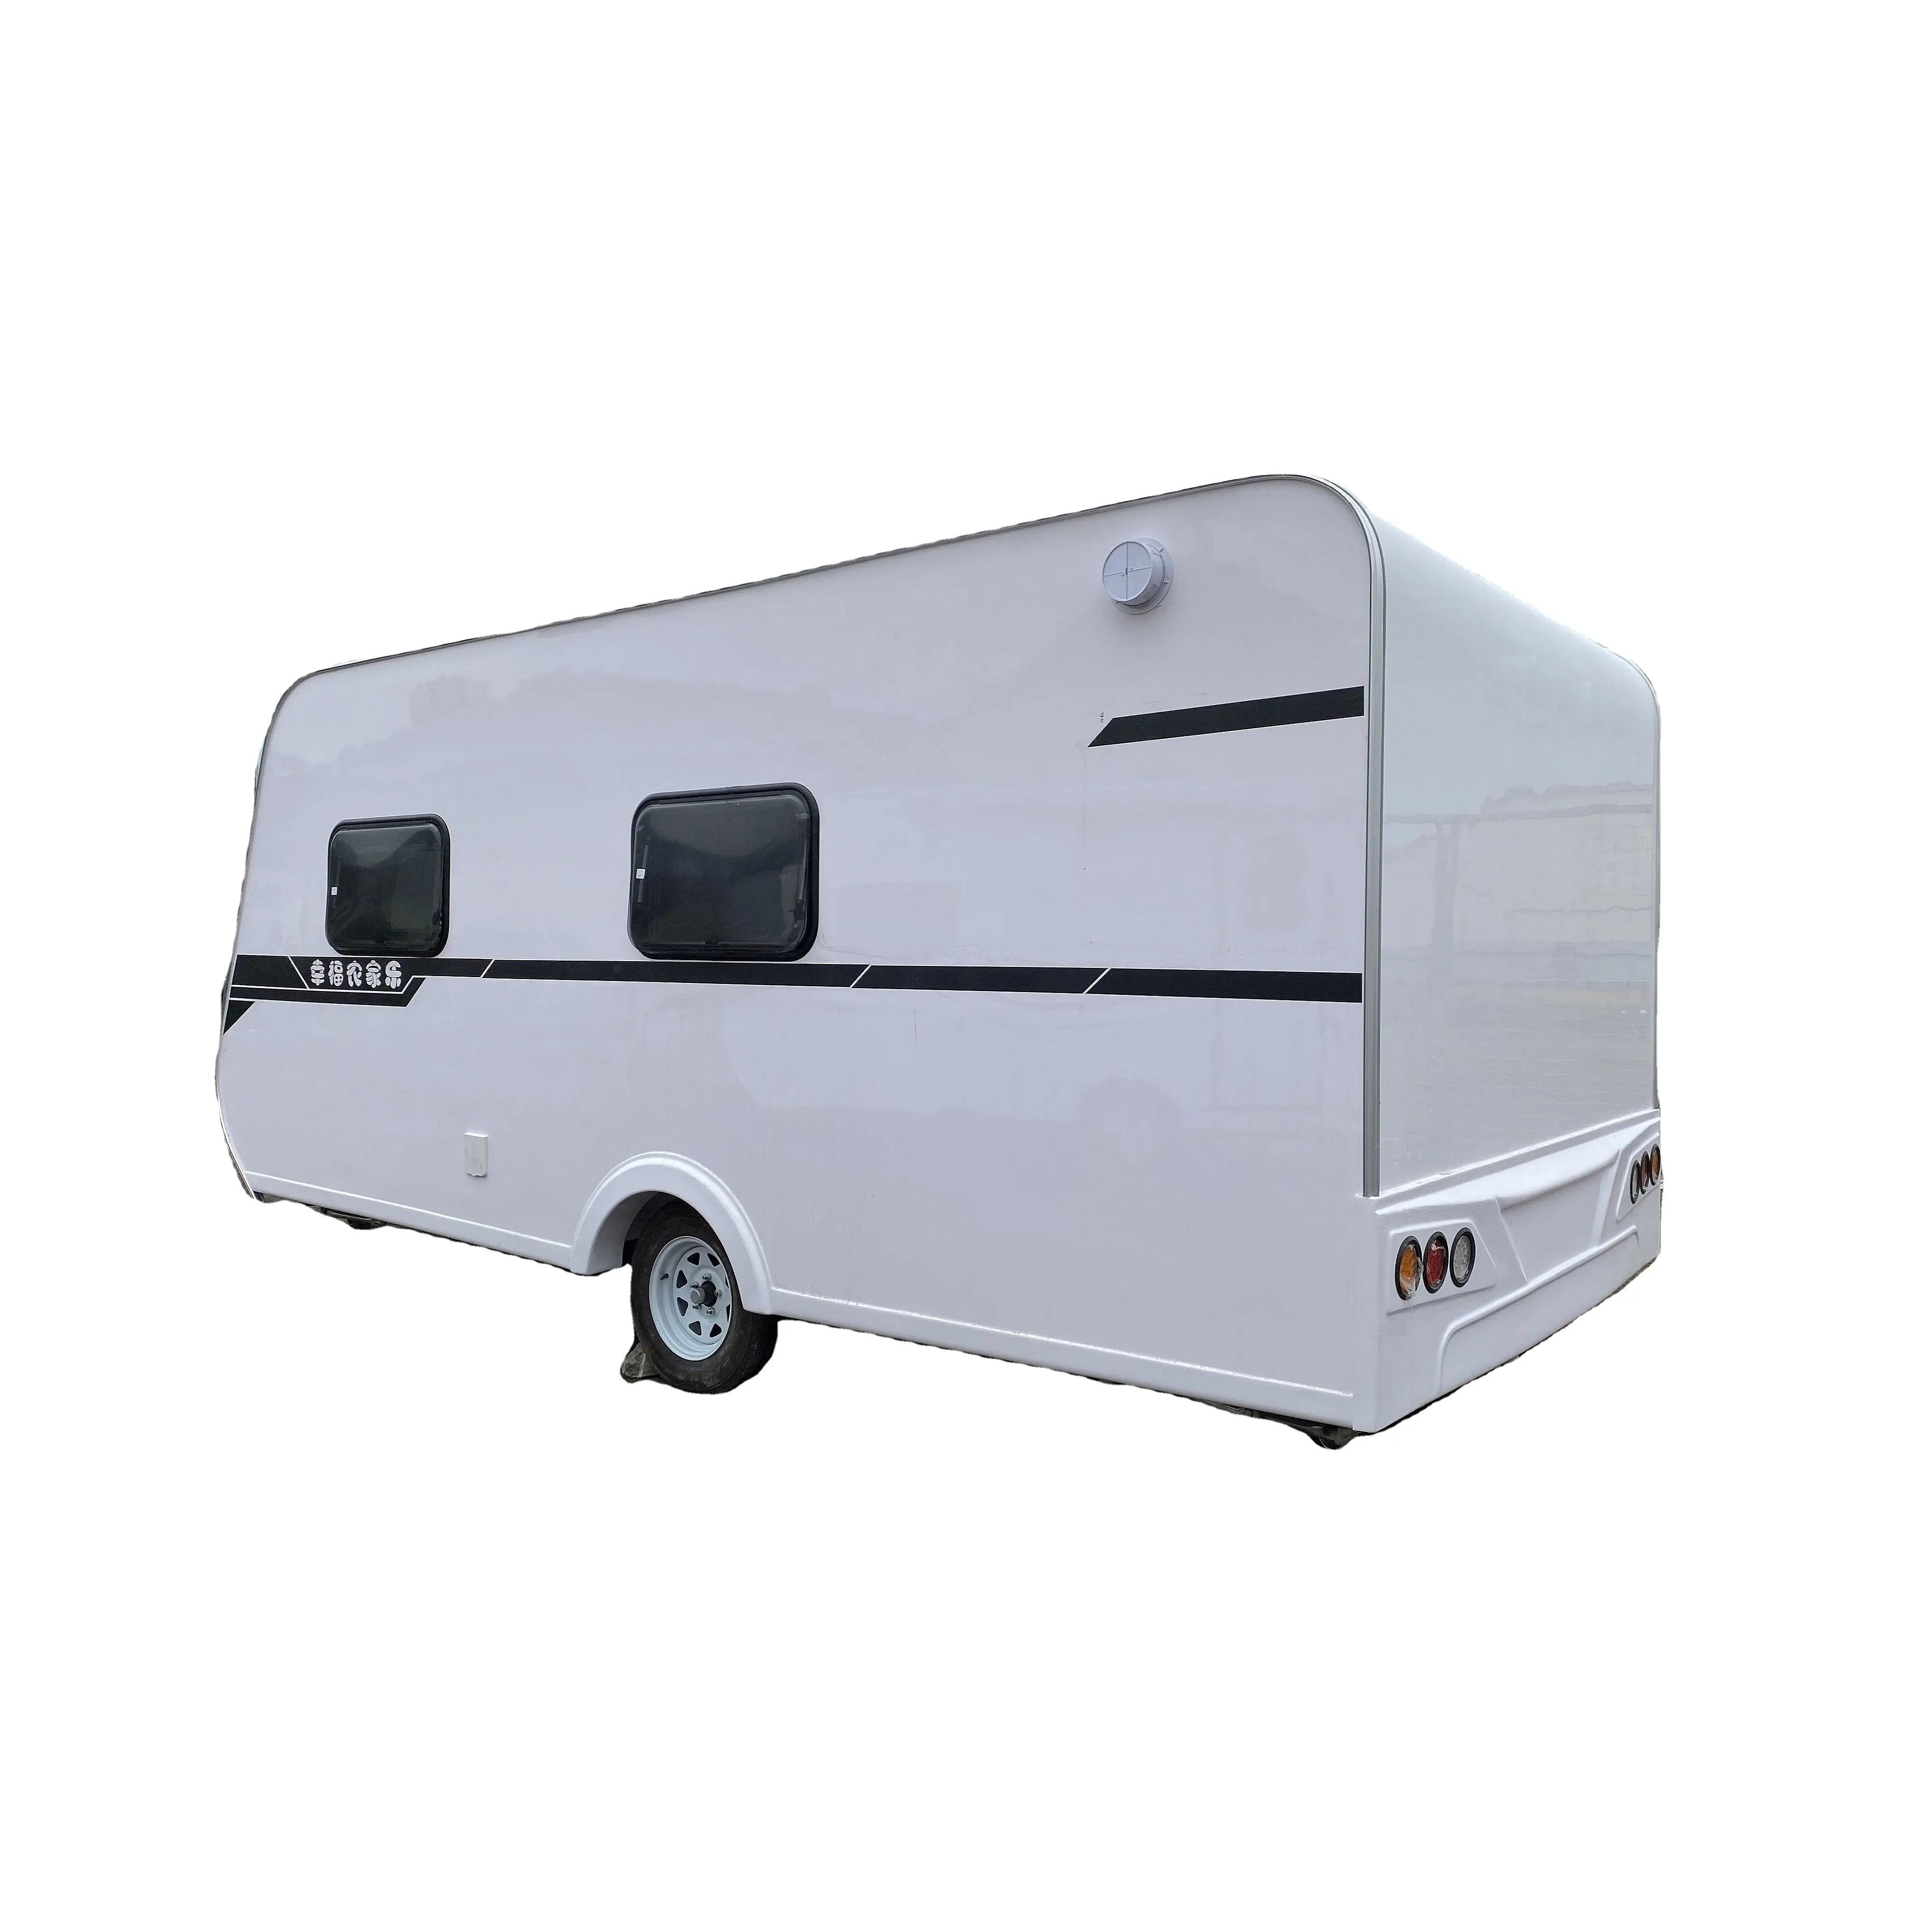 THE NEWEST CAMPING CARAVAN 490 MADE IN QINGDAO